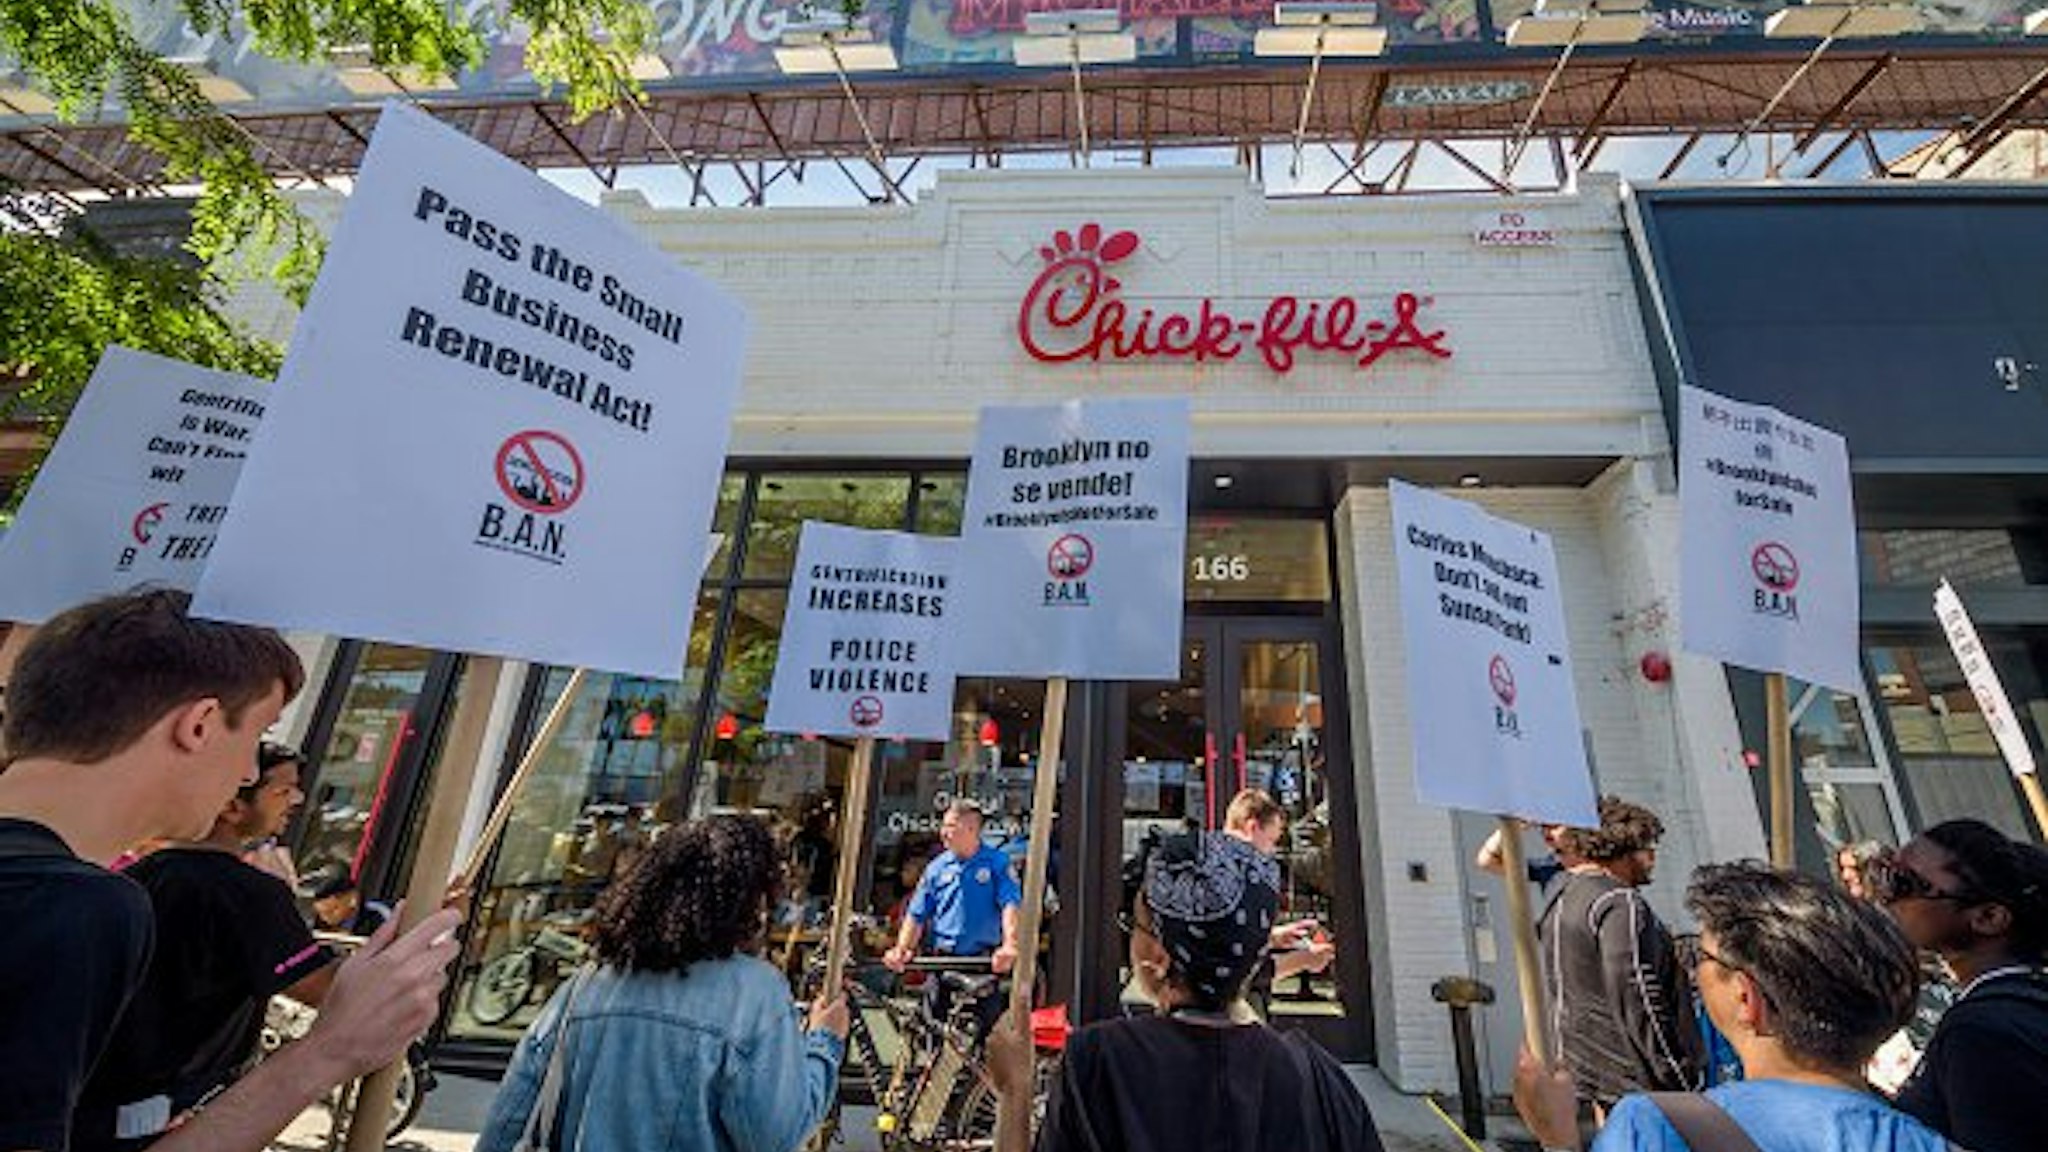 Protesters targeted Chick-Fil-A for their alleged homophobe stance - some of the banners accused Chick-Fil-A of being anti gay.